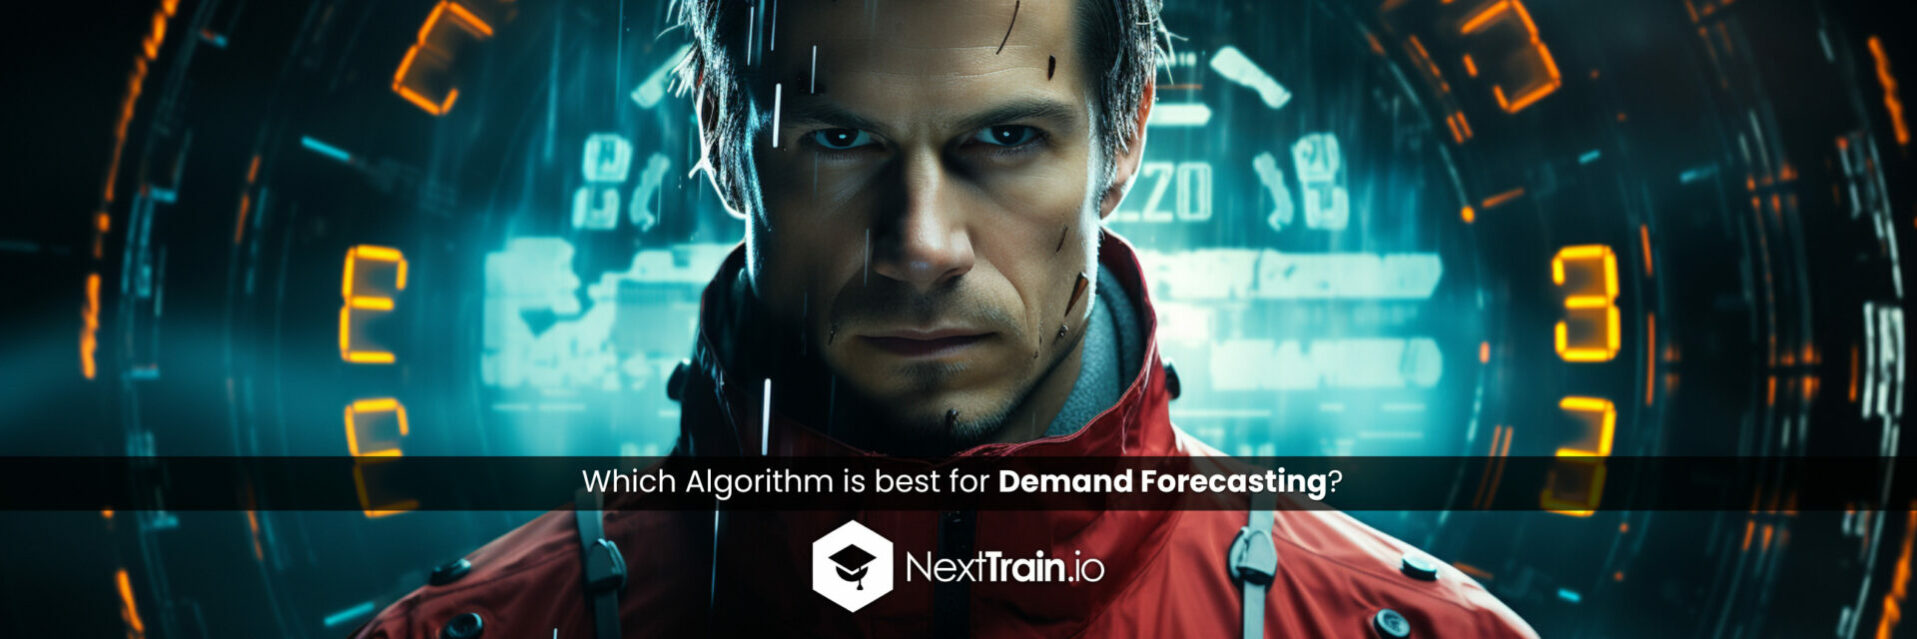 Which algorithm is best for demand forecasting?